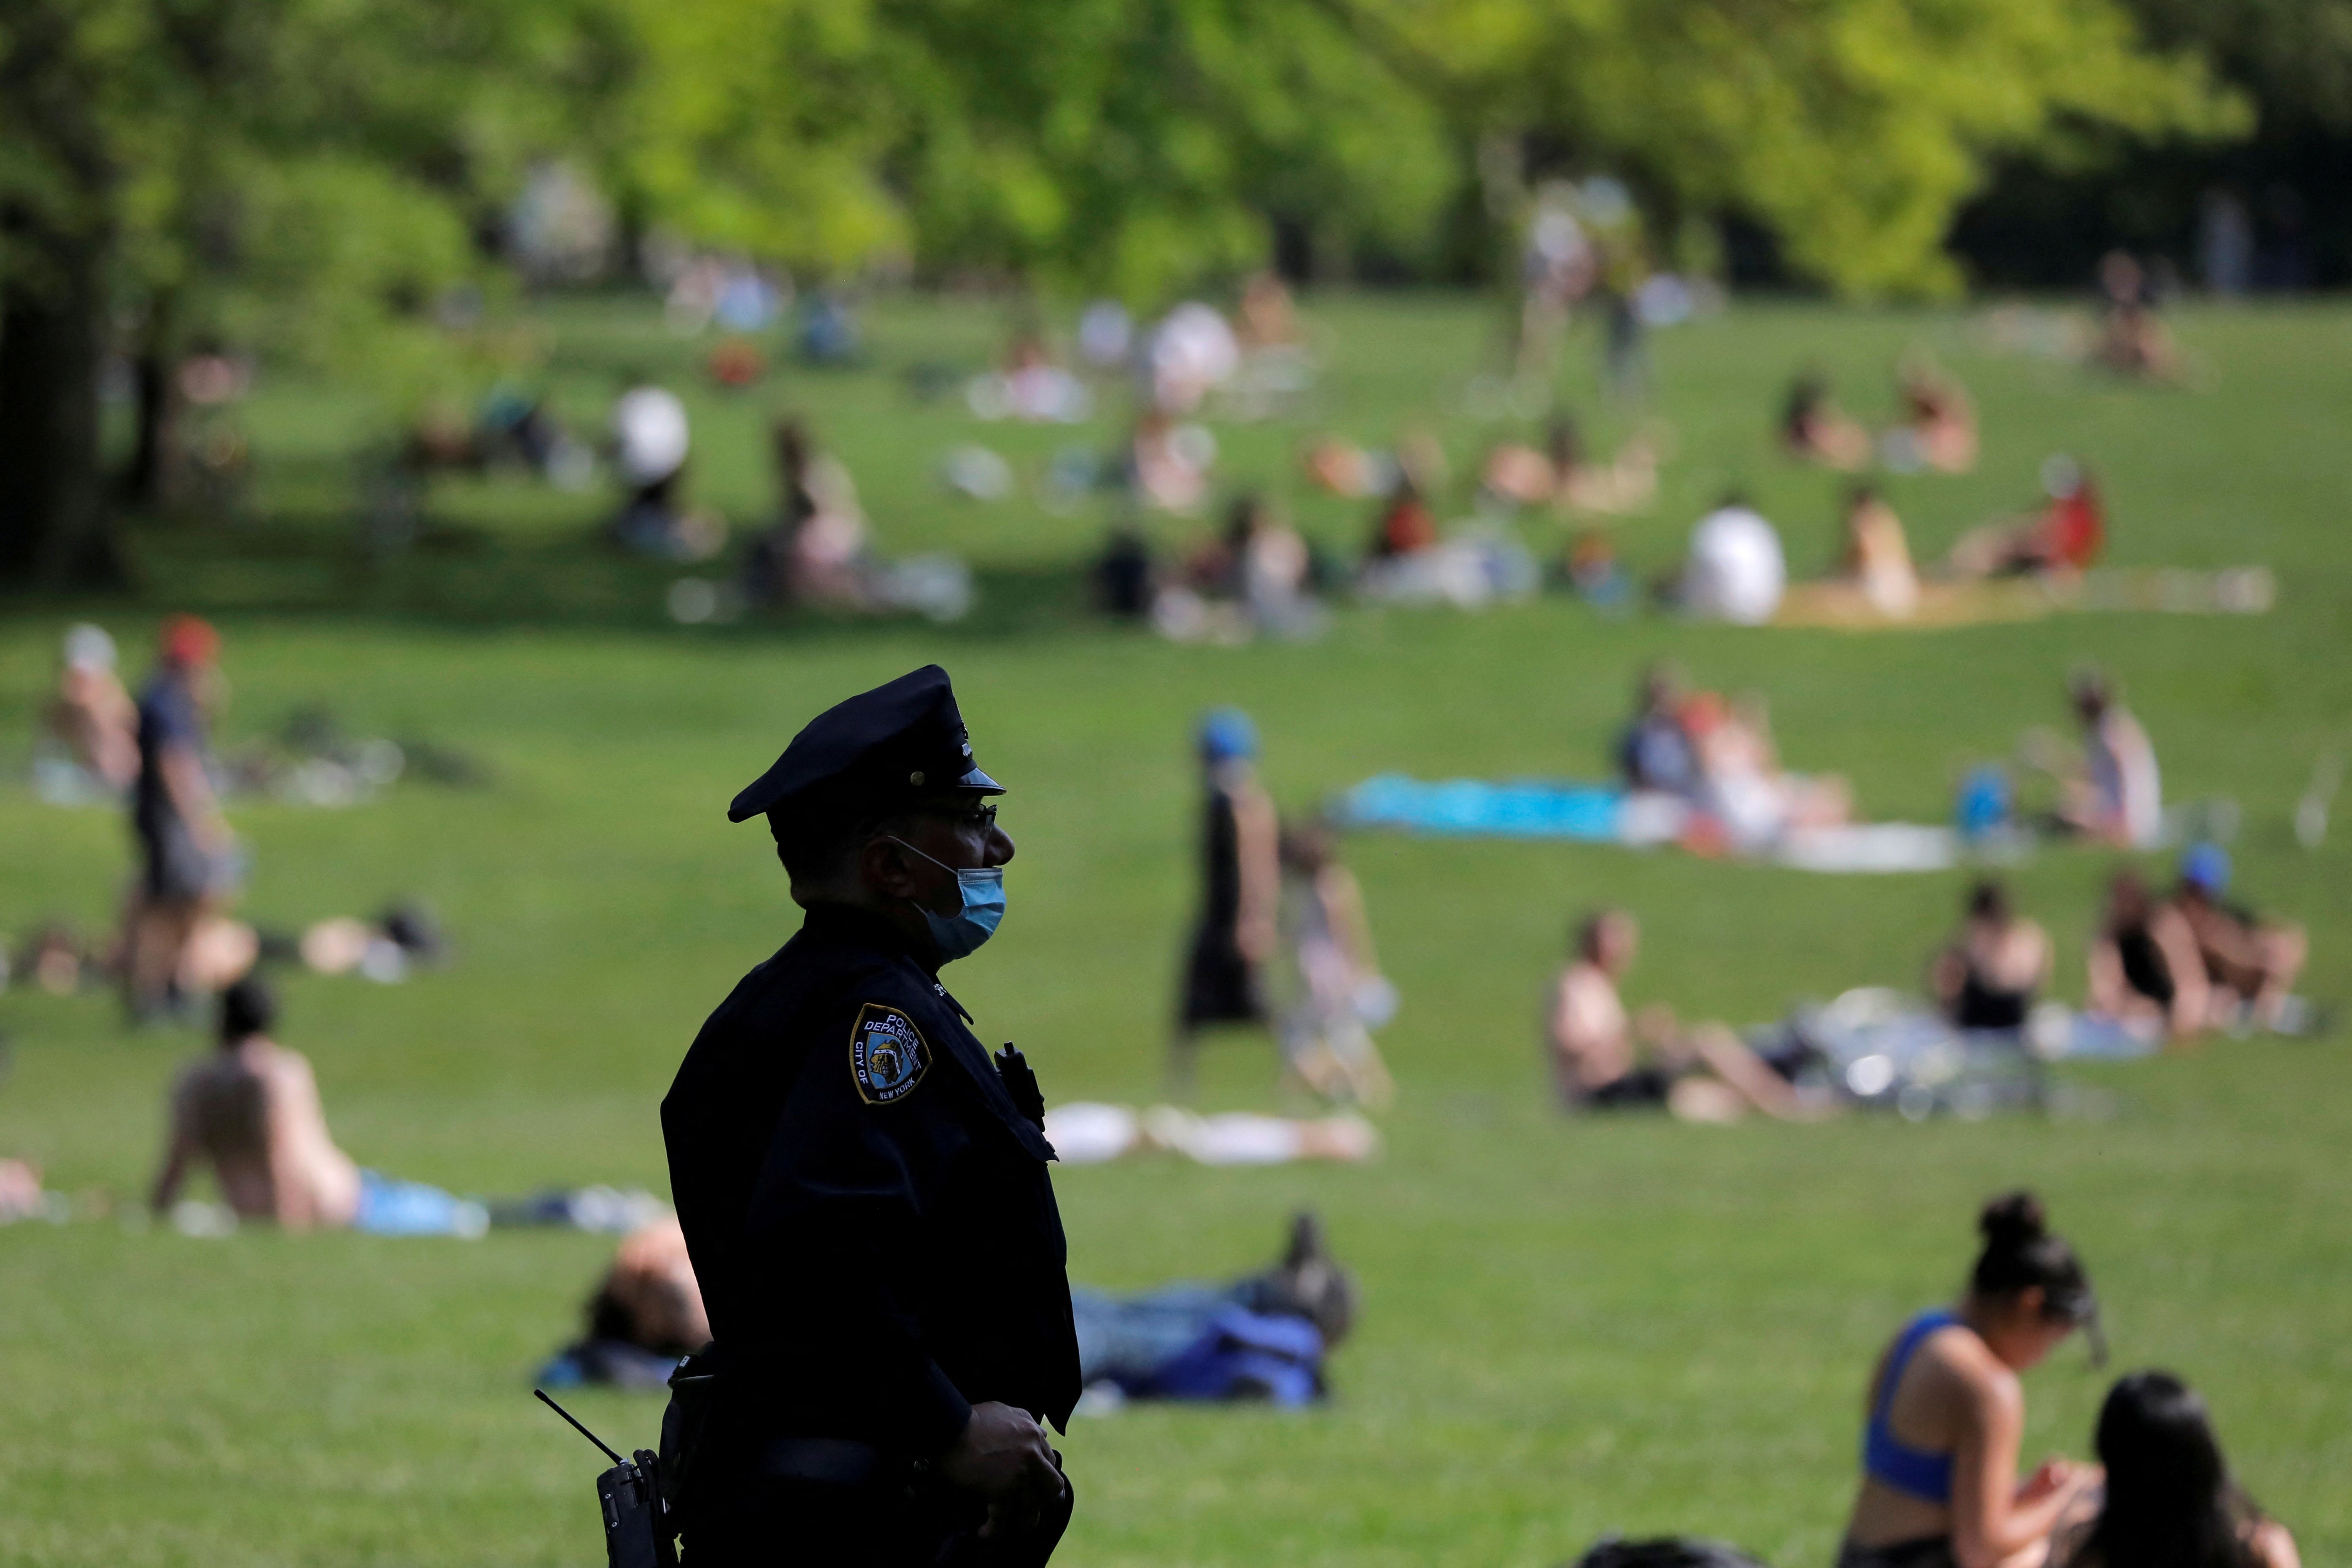 <p>A New York City Police Department officer wearing a protective face mask watches as people gather in the Sheep Meadow in Central Park </p>